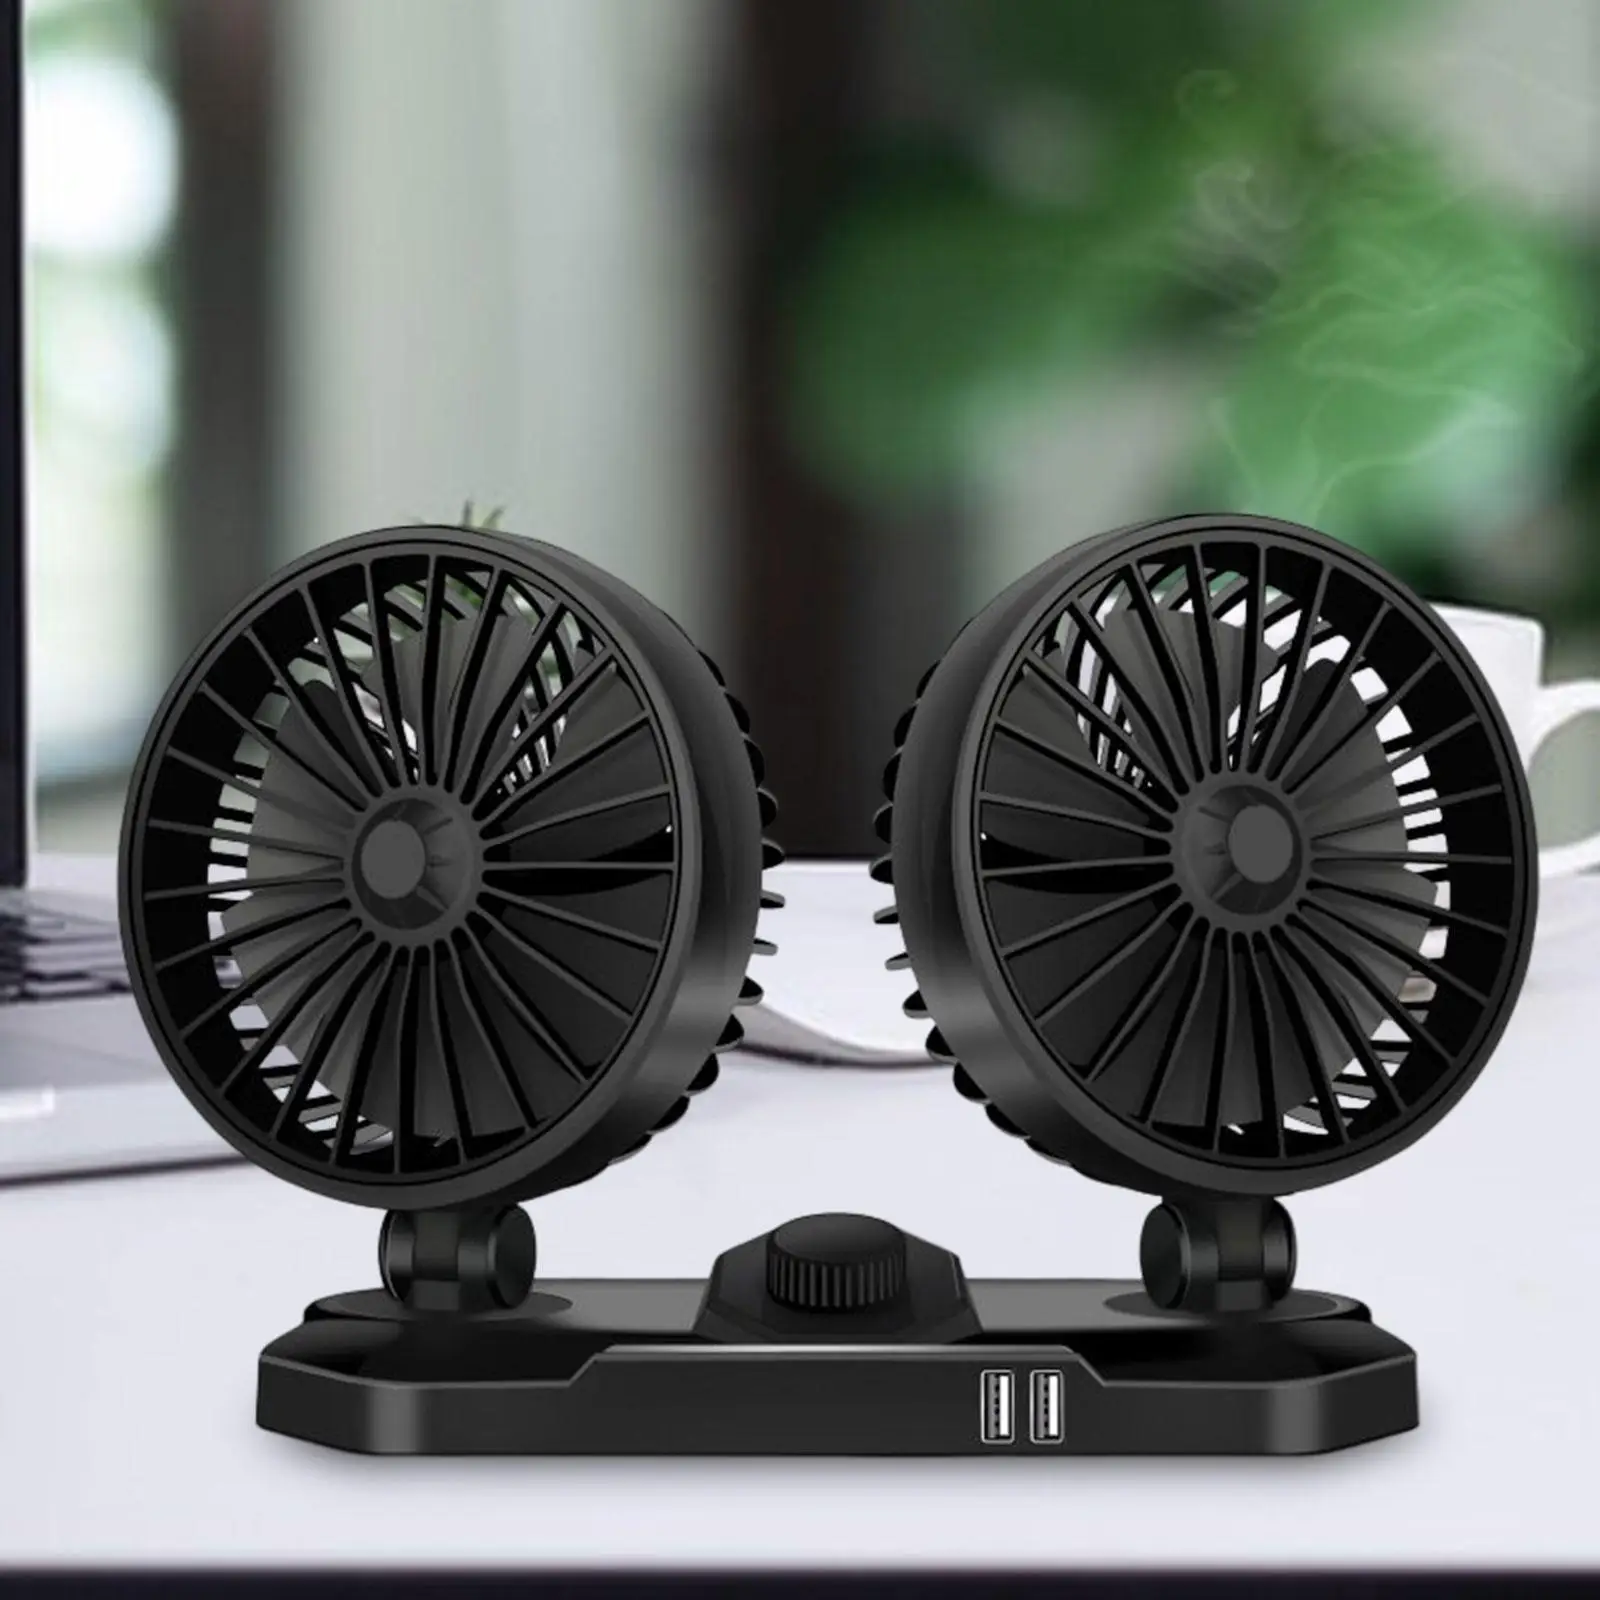 Small Car fan Degree Rotatable Personal Strong Wind Cooling air Fan for Vehicles Boat Dashdoard Sedan Office